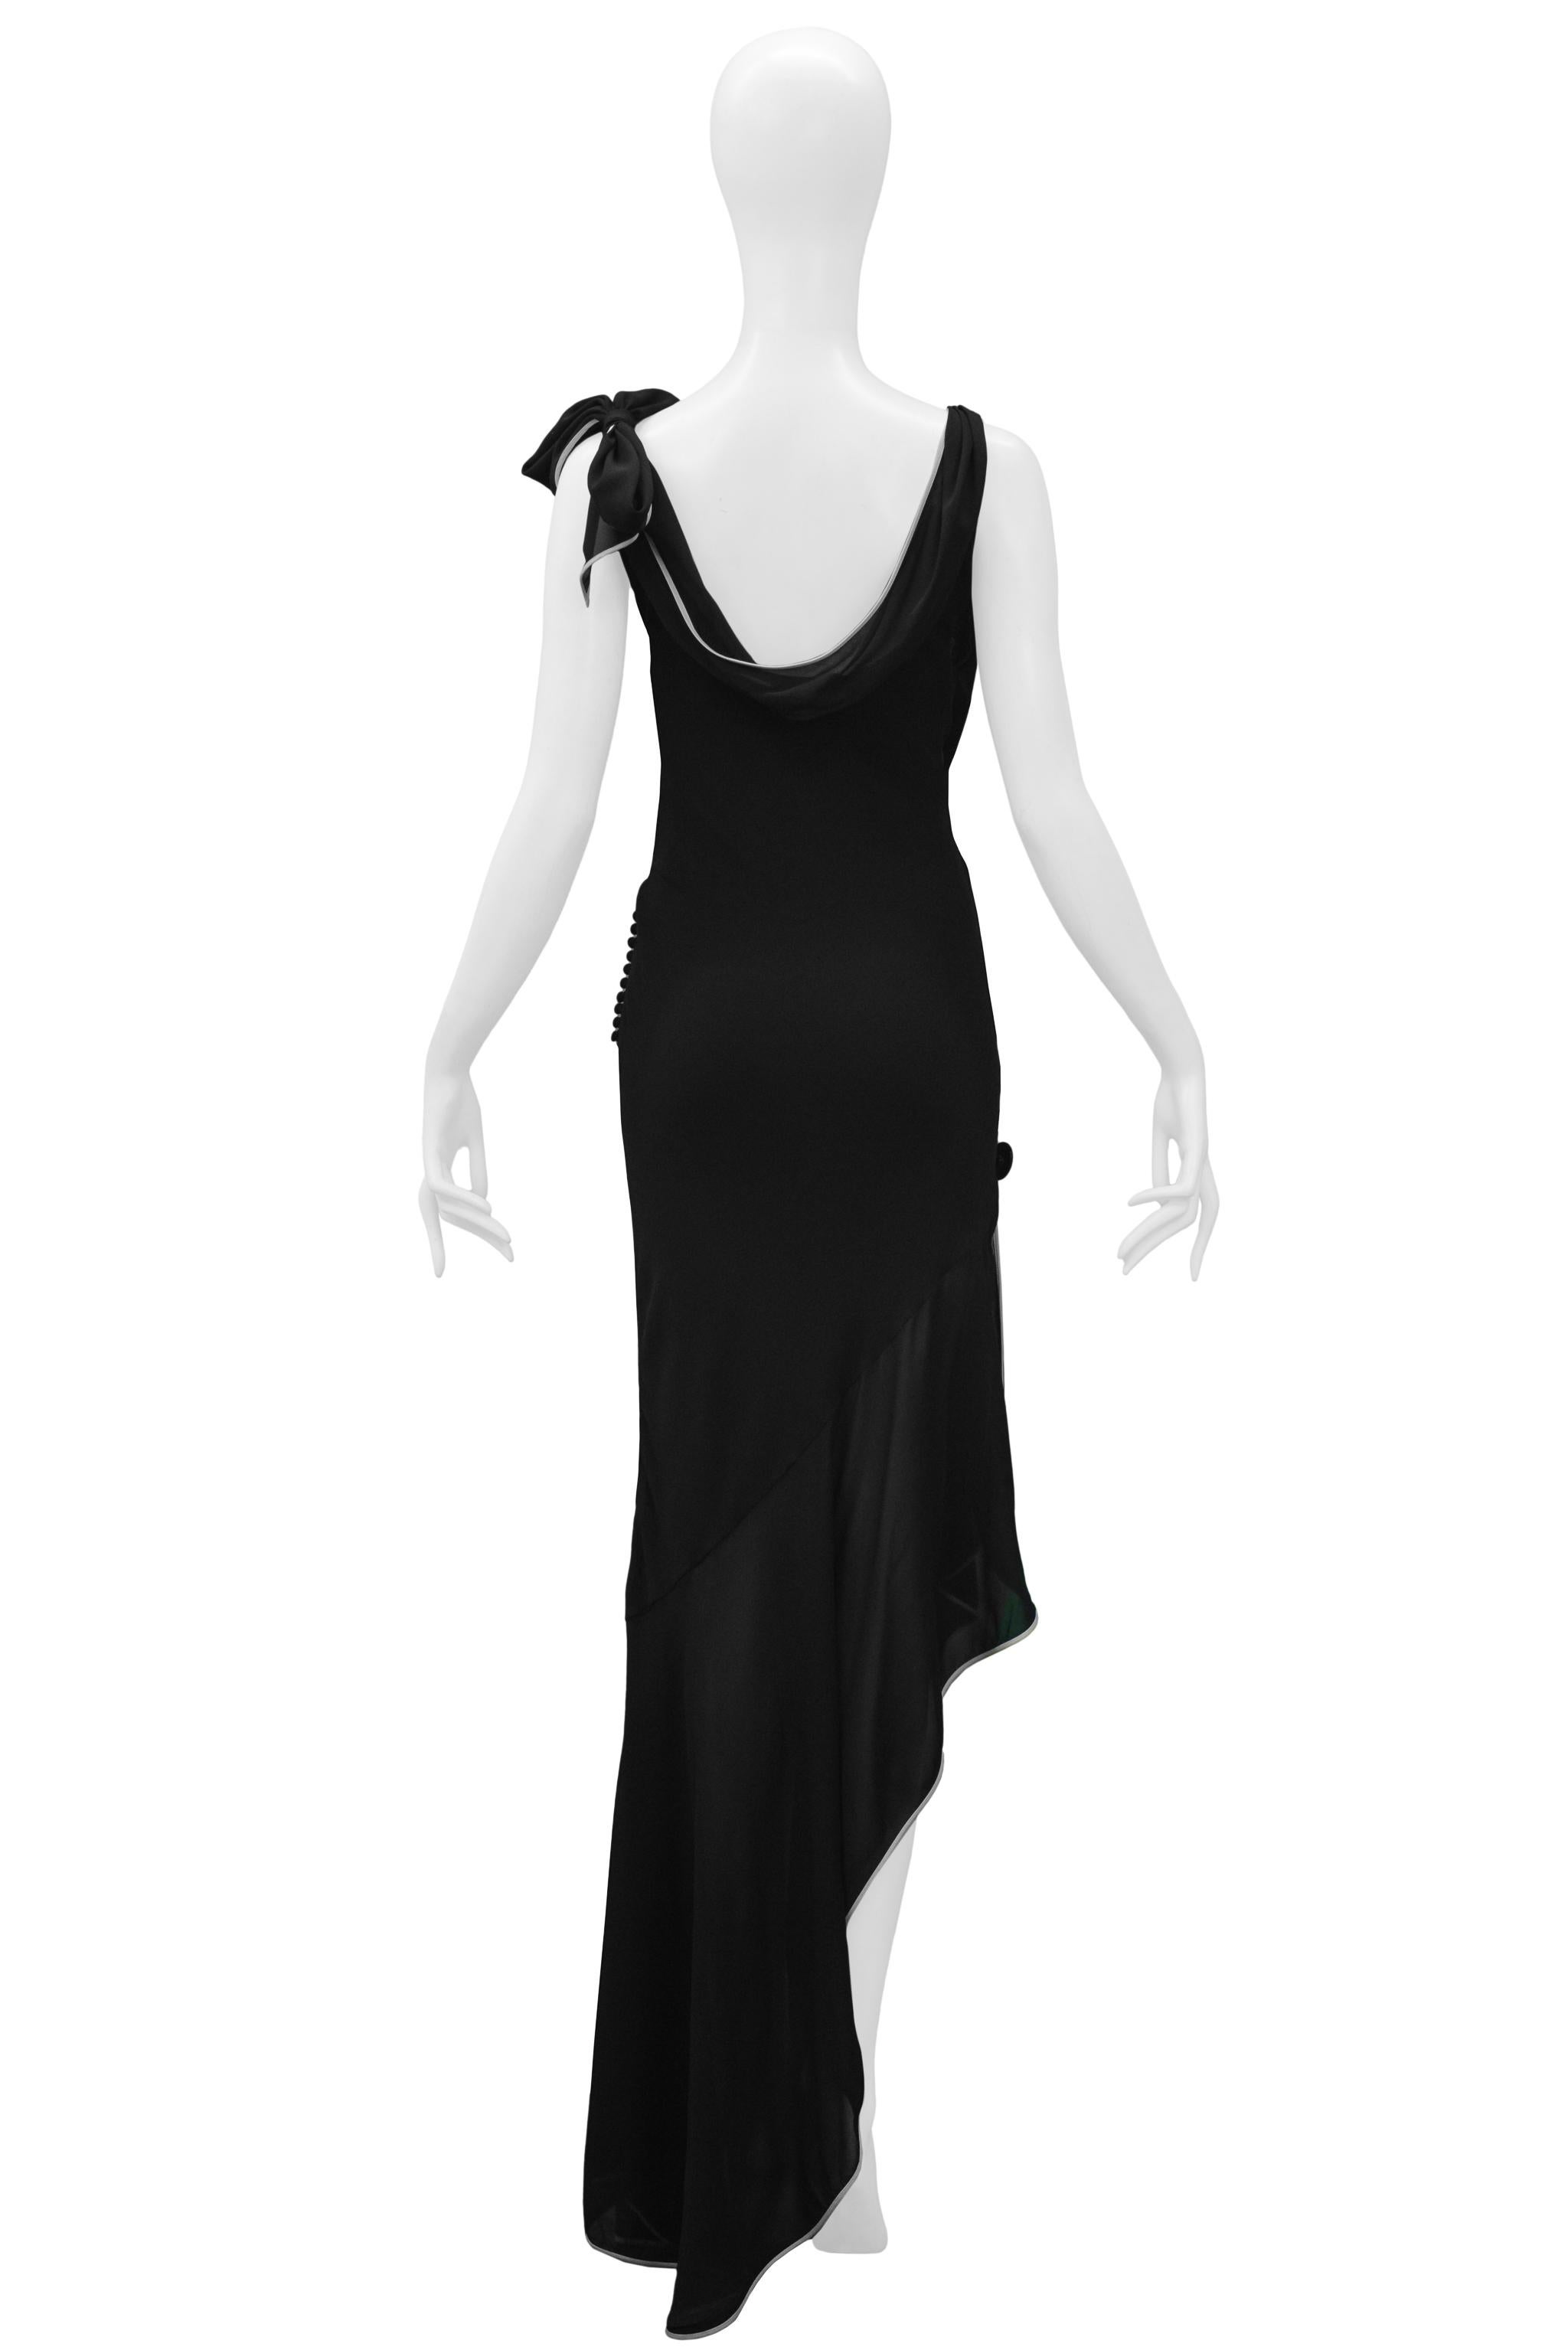 Christian Dior Black Maxi Evening Dress With White Trim And Bow 1